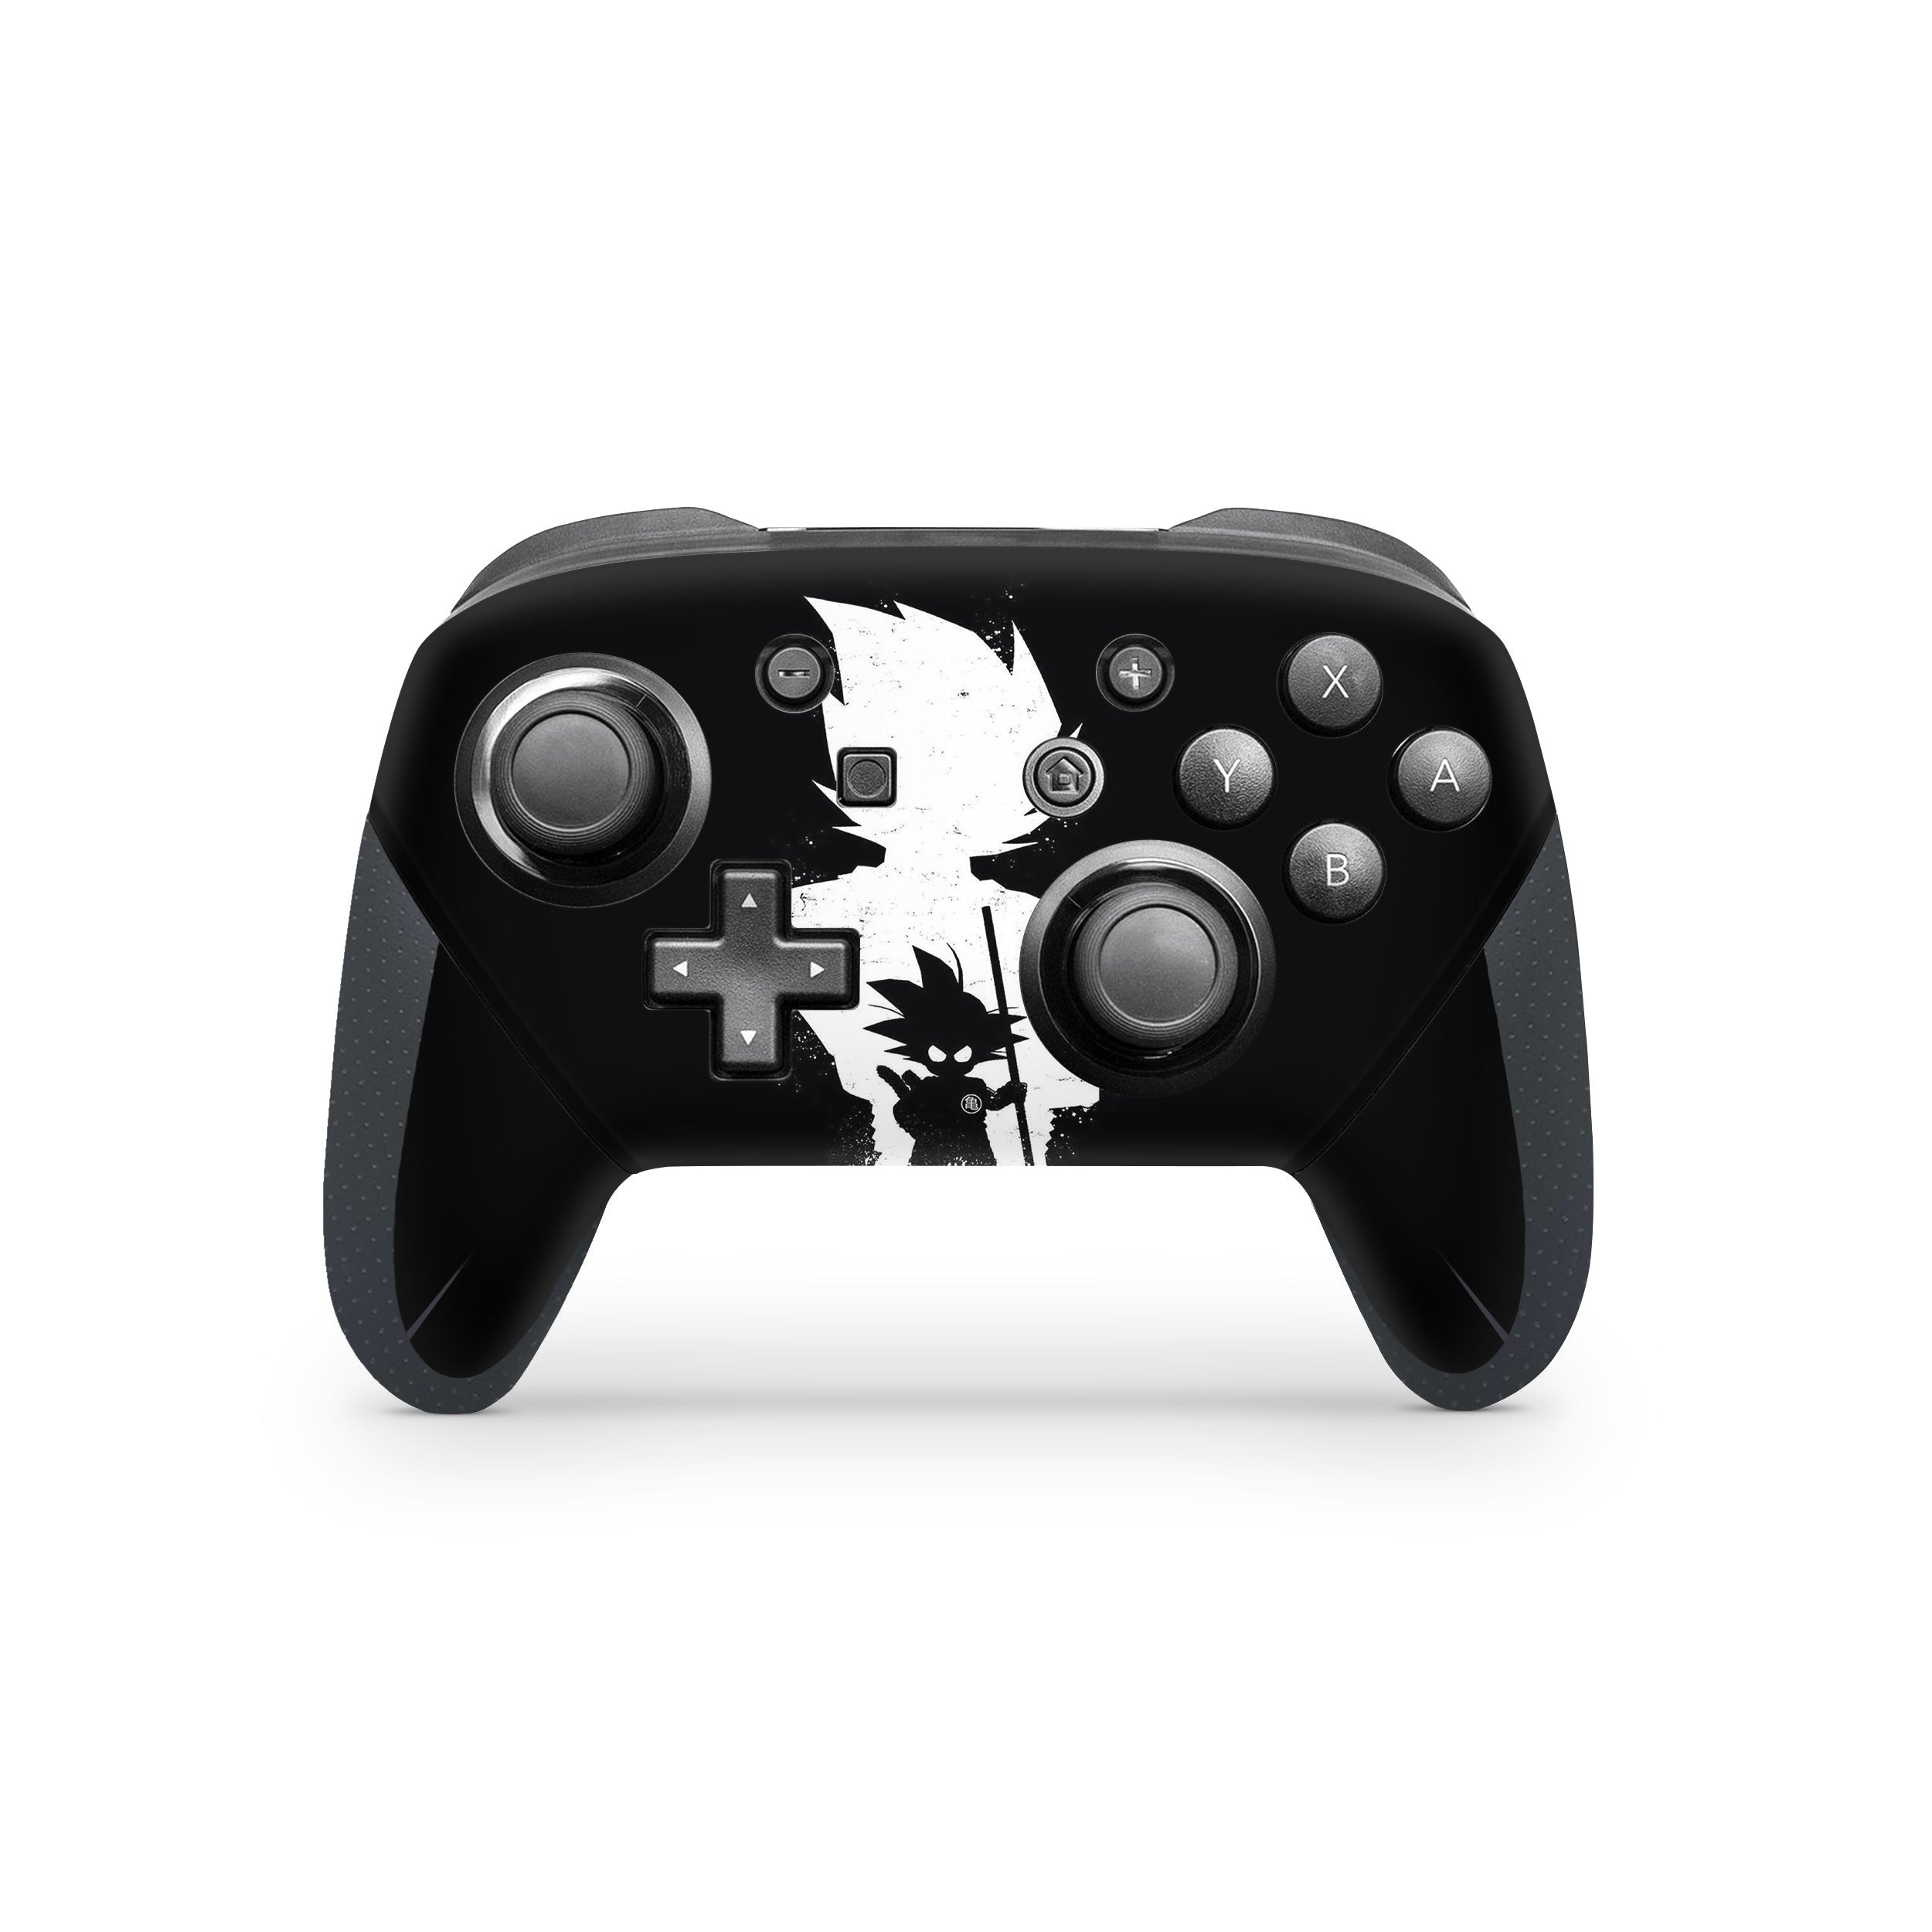 A video game skin featuring a Dragon Ball Z Goku design for the Switch Pro Controller.